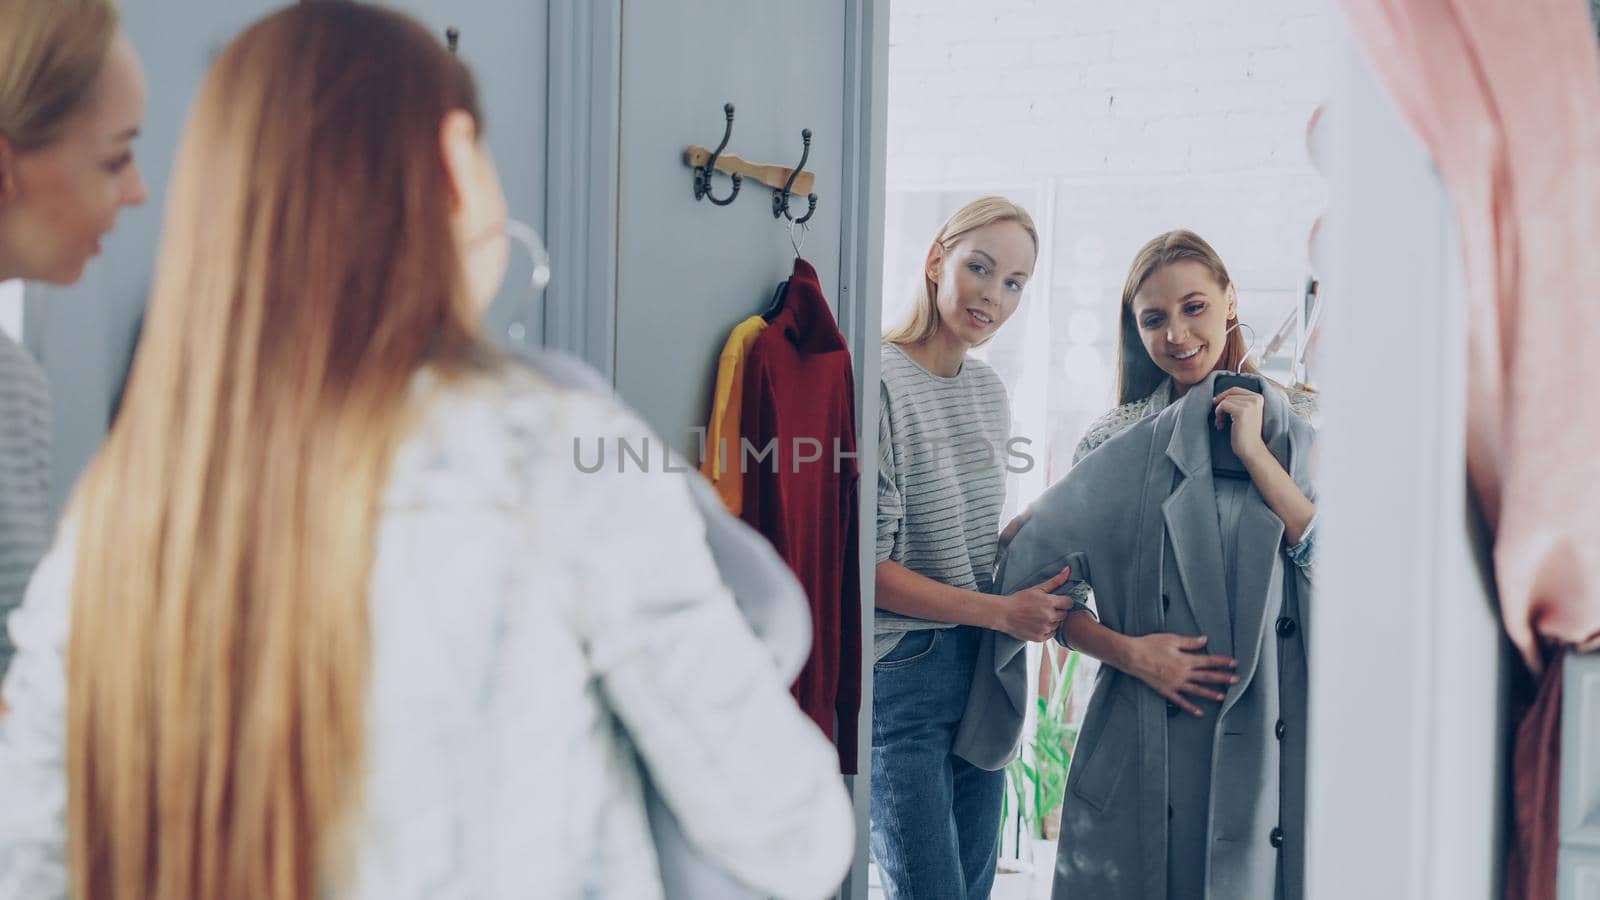 Pretty young woman is checking fashionable coat in fitting room with her friend helping her to appraise garment. They are talking, gesturing and looking at clothing. by silverkblack